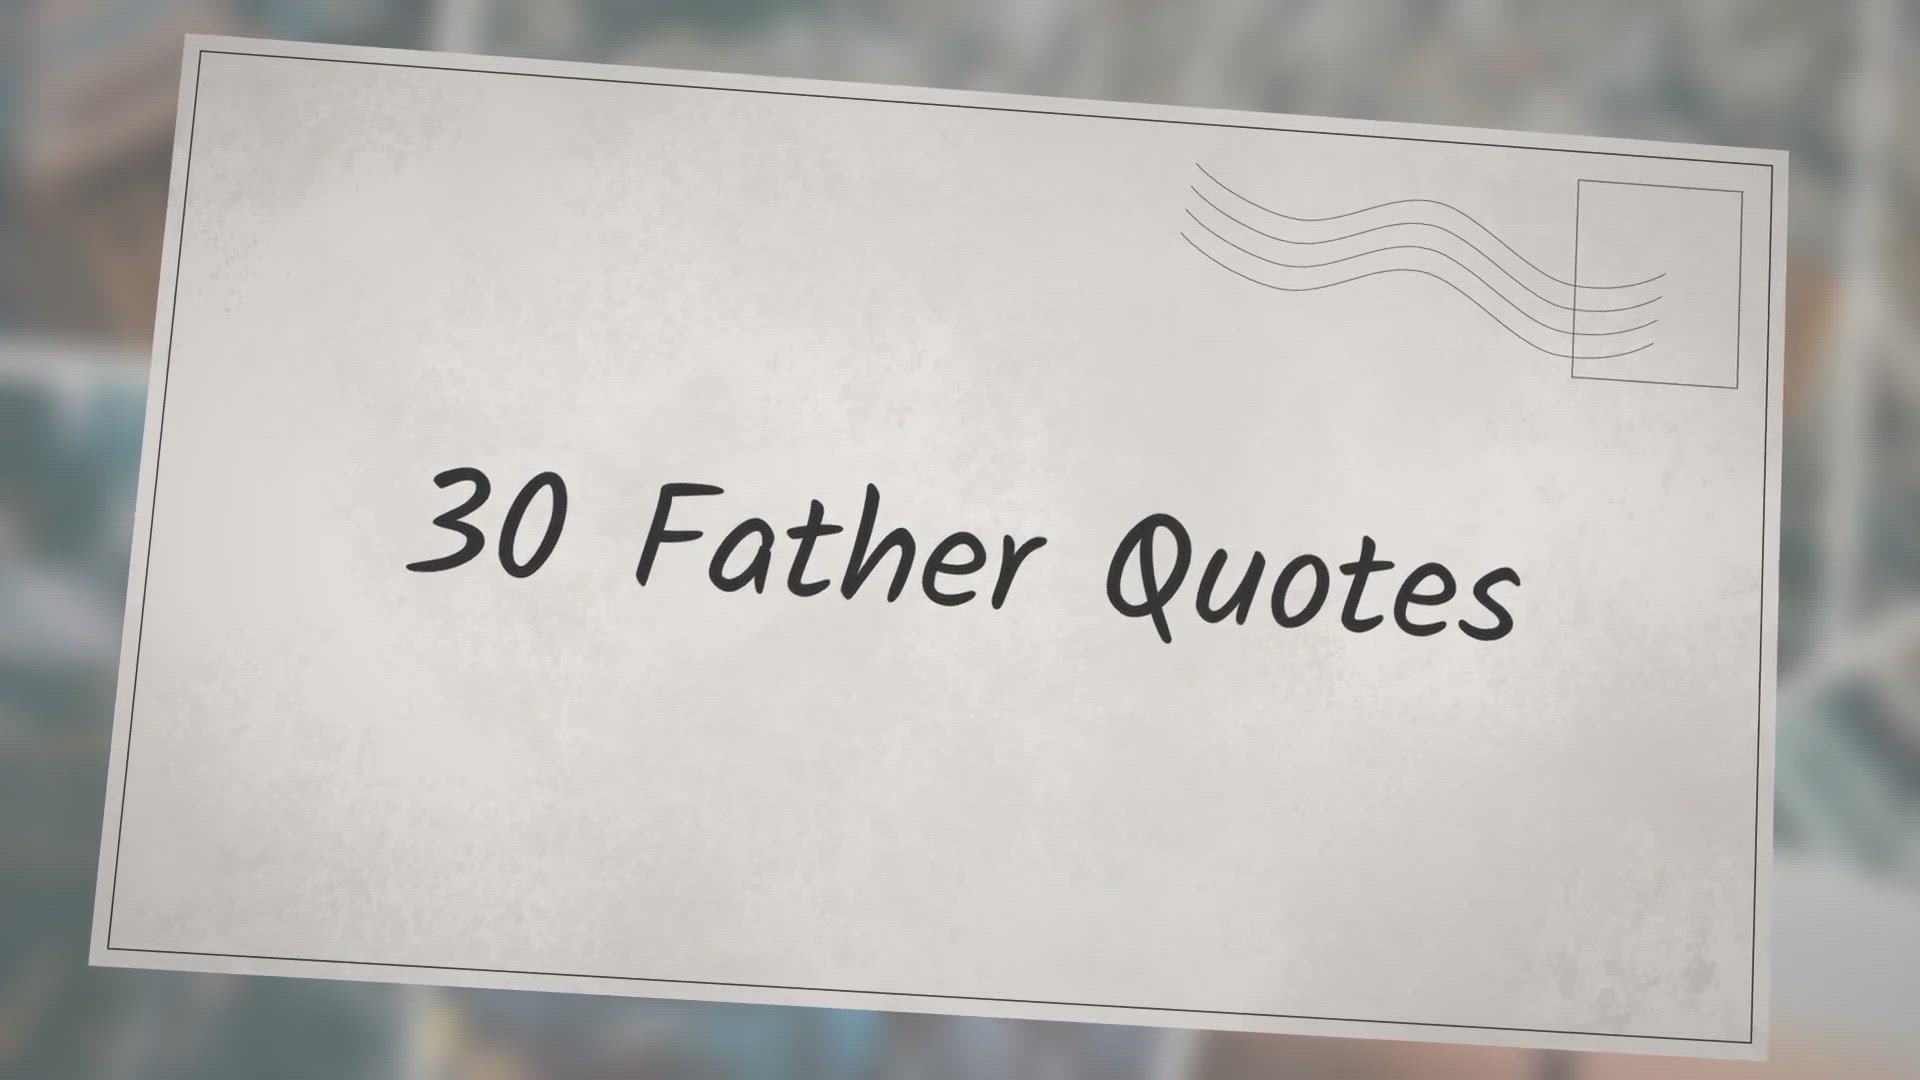 'Video thumbnail for 30 Father Quotes'